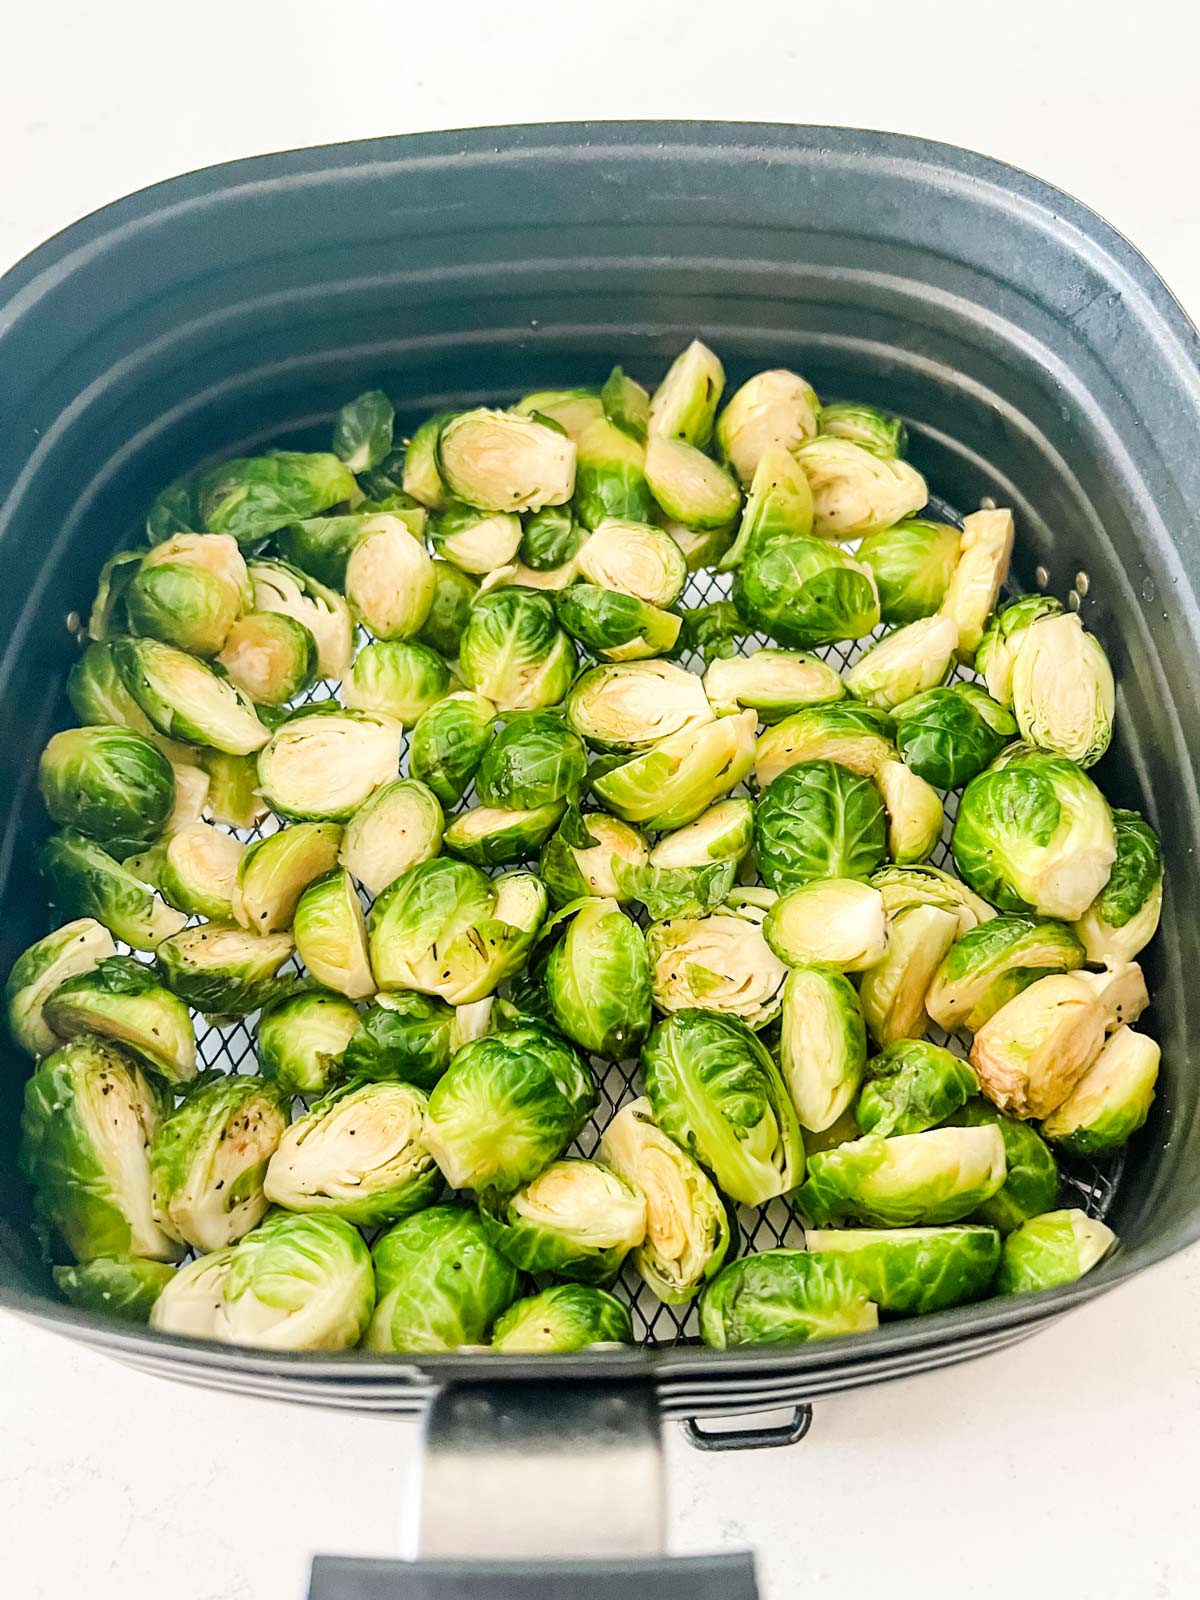 Brussels sprouts in an air fryer basket ready to cook.